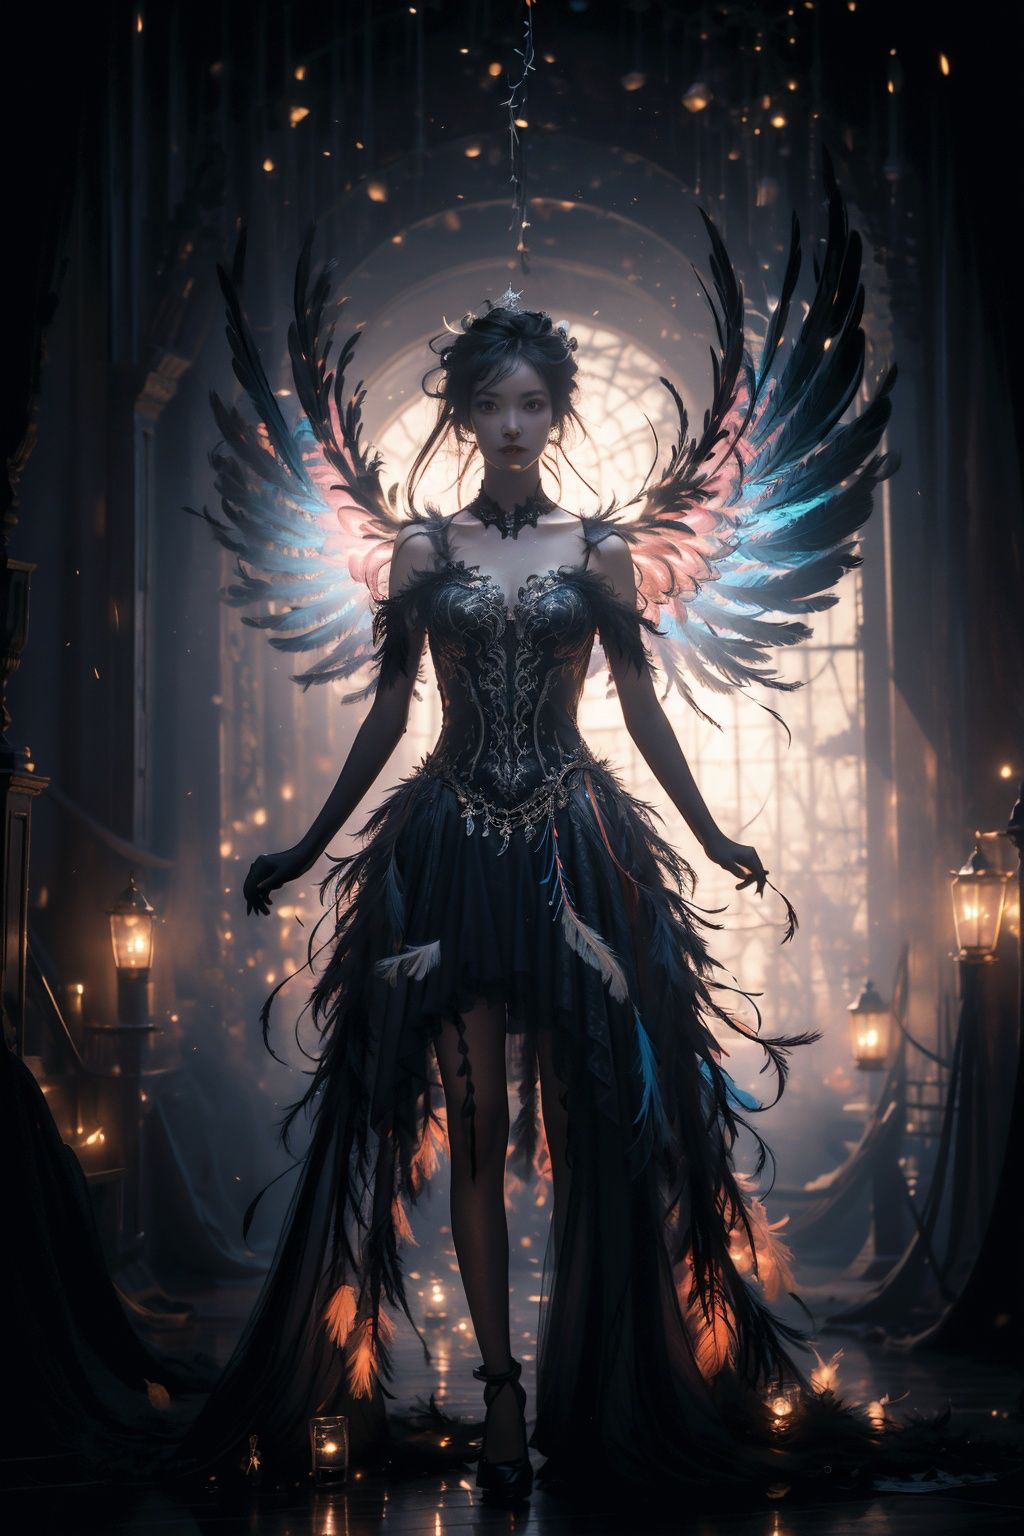   1  girl,  feather  dress,  magical  background,  feather  wings,  full  body,  silhouette  light,  halloween,  (cinematic  composition:1.3),  (depth  of  field:1.2),  (magic  atmosphere:1.1),  (spooky  props:1.0),  (bright  colors:0.9),  (contrasting  light  and  shadow:0.8),  (eerie  sounds:0.7),  (candlelight:0.6).